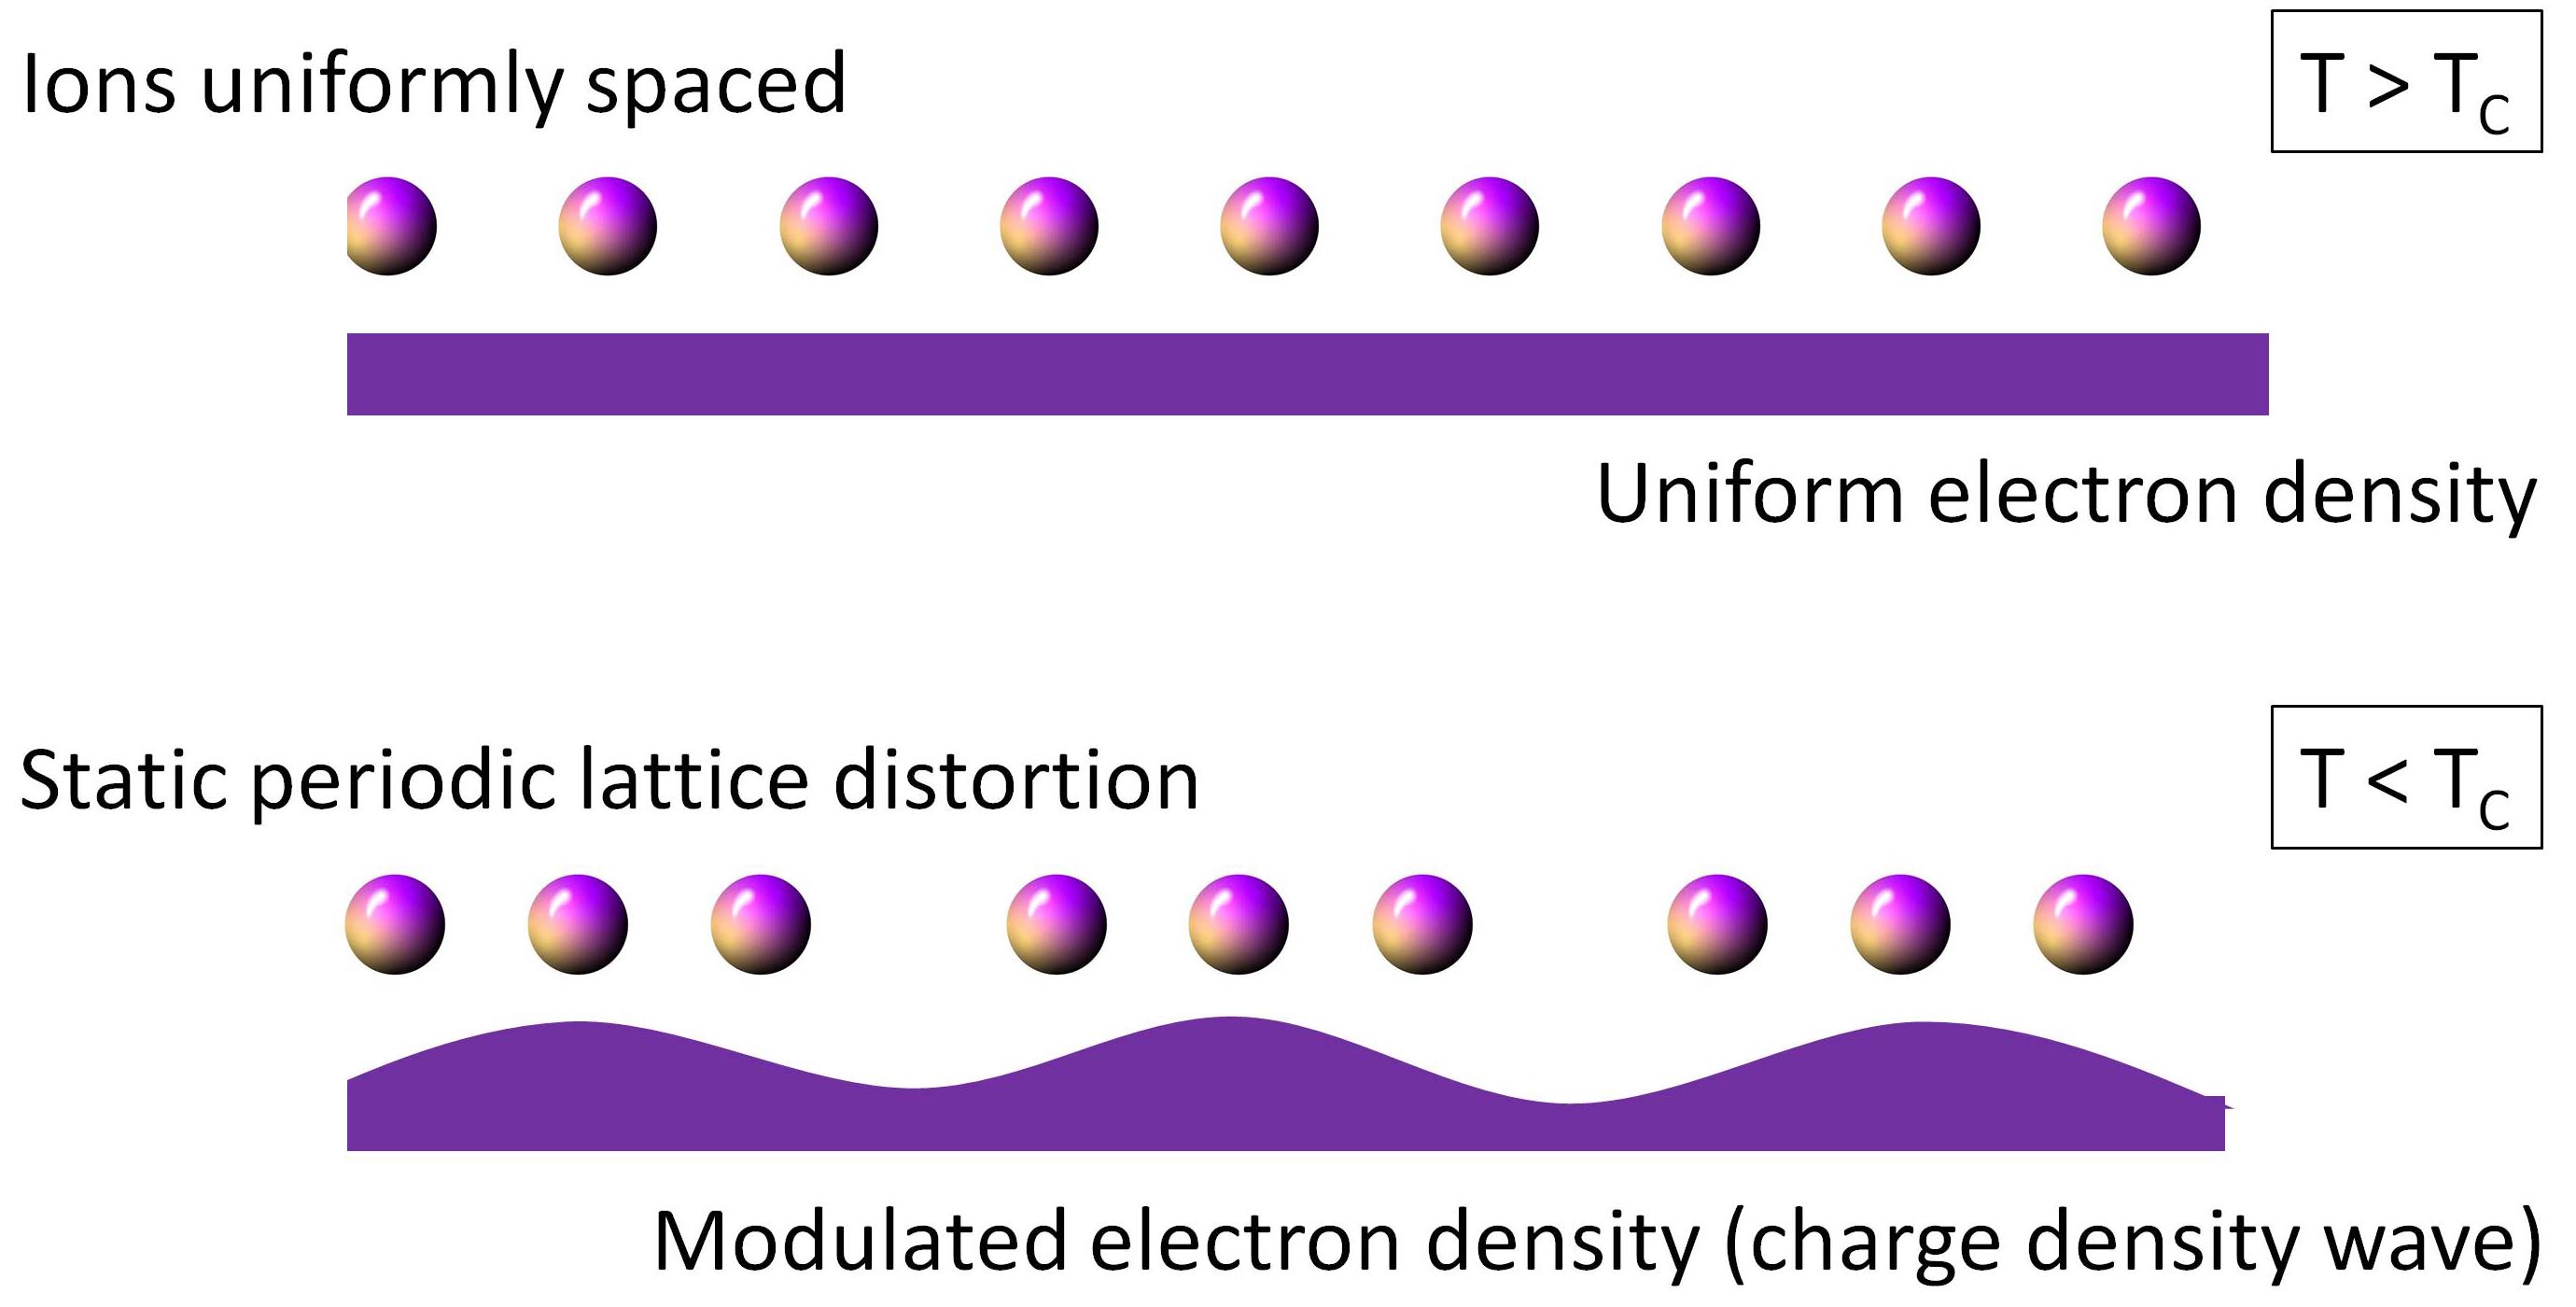 Charge density wave